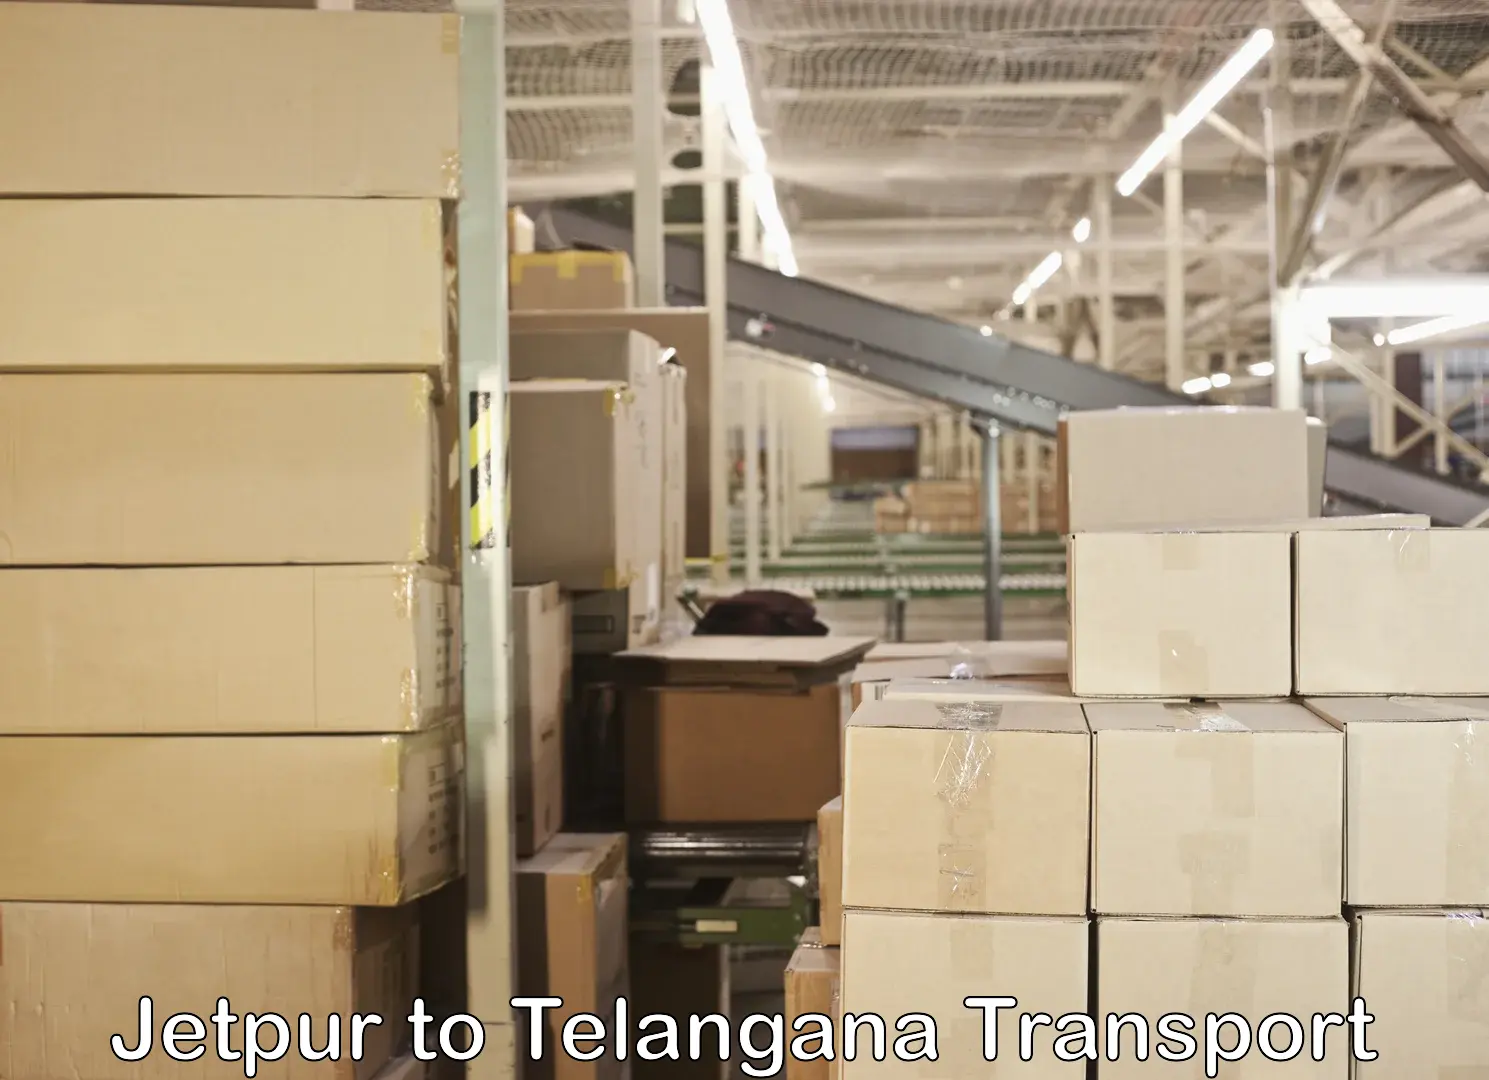 Air freight transport services Jetpur to Hyderabad